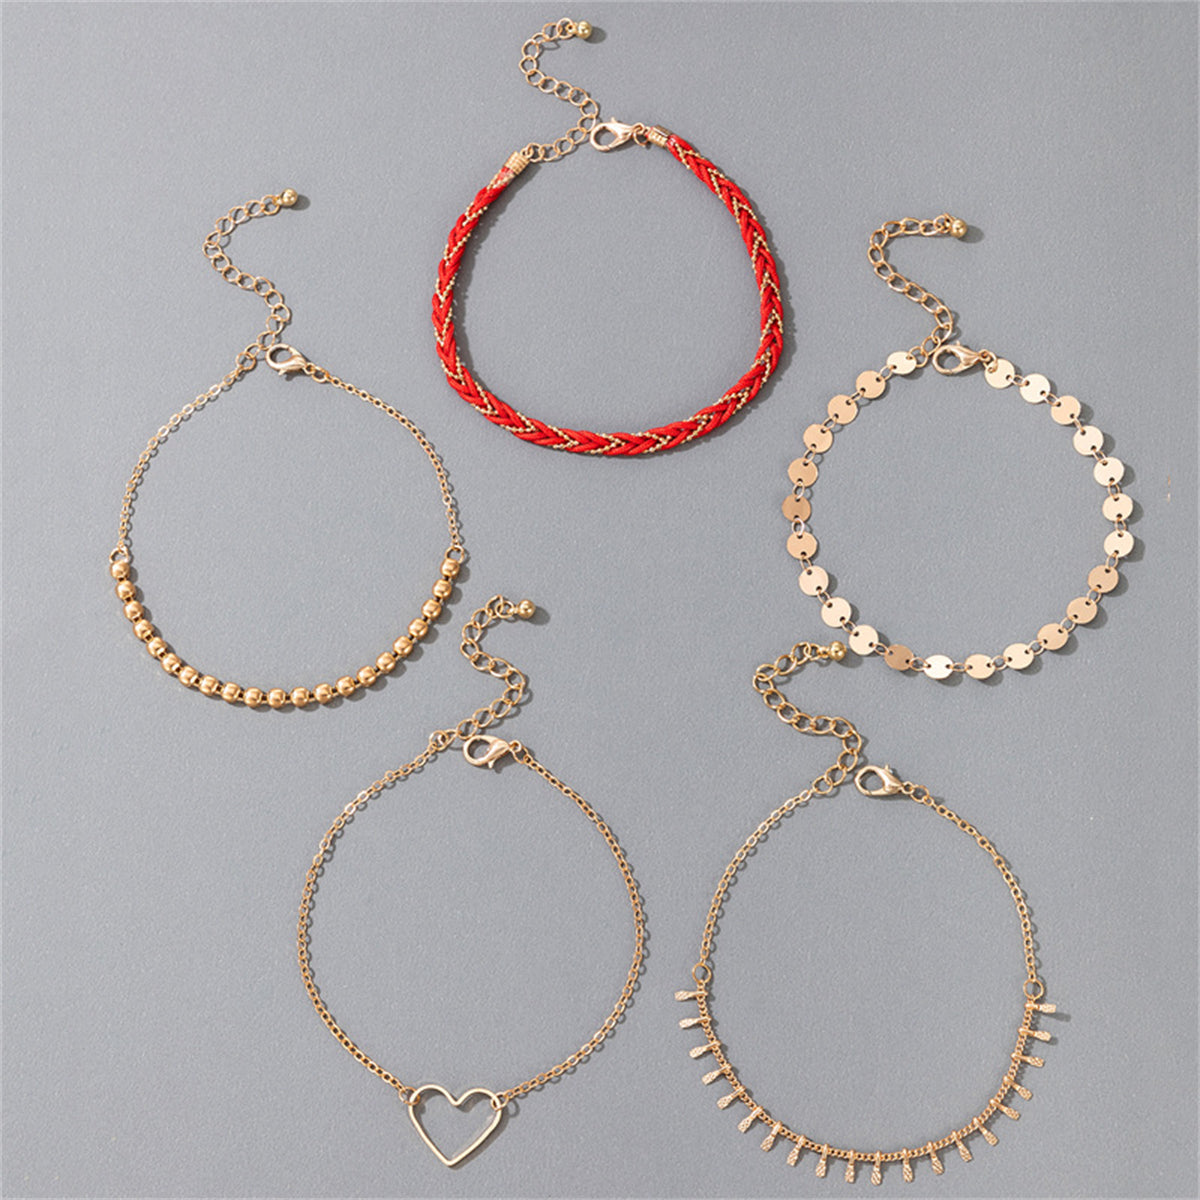 Red Polyster & 18K Gold-Plated Open-Heart Bead Chain Anklet Set